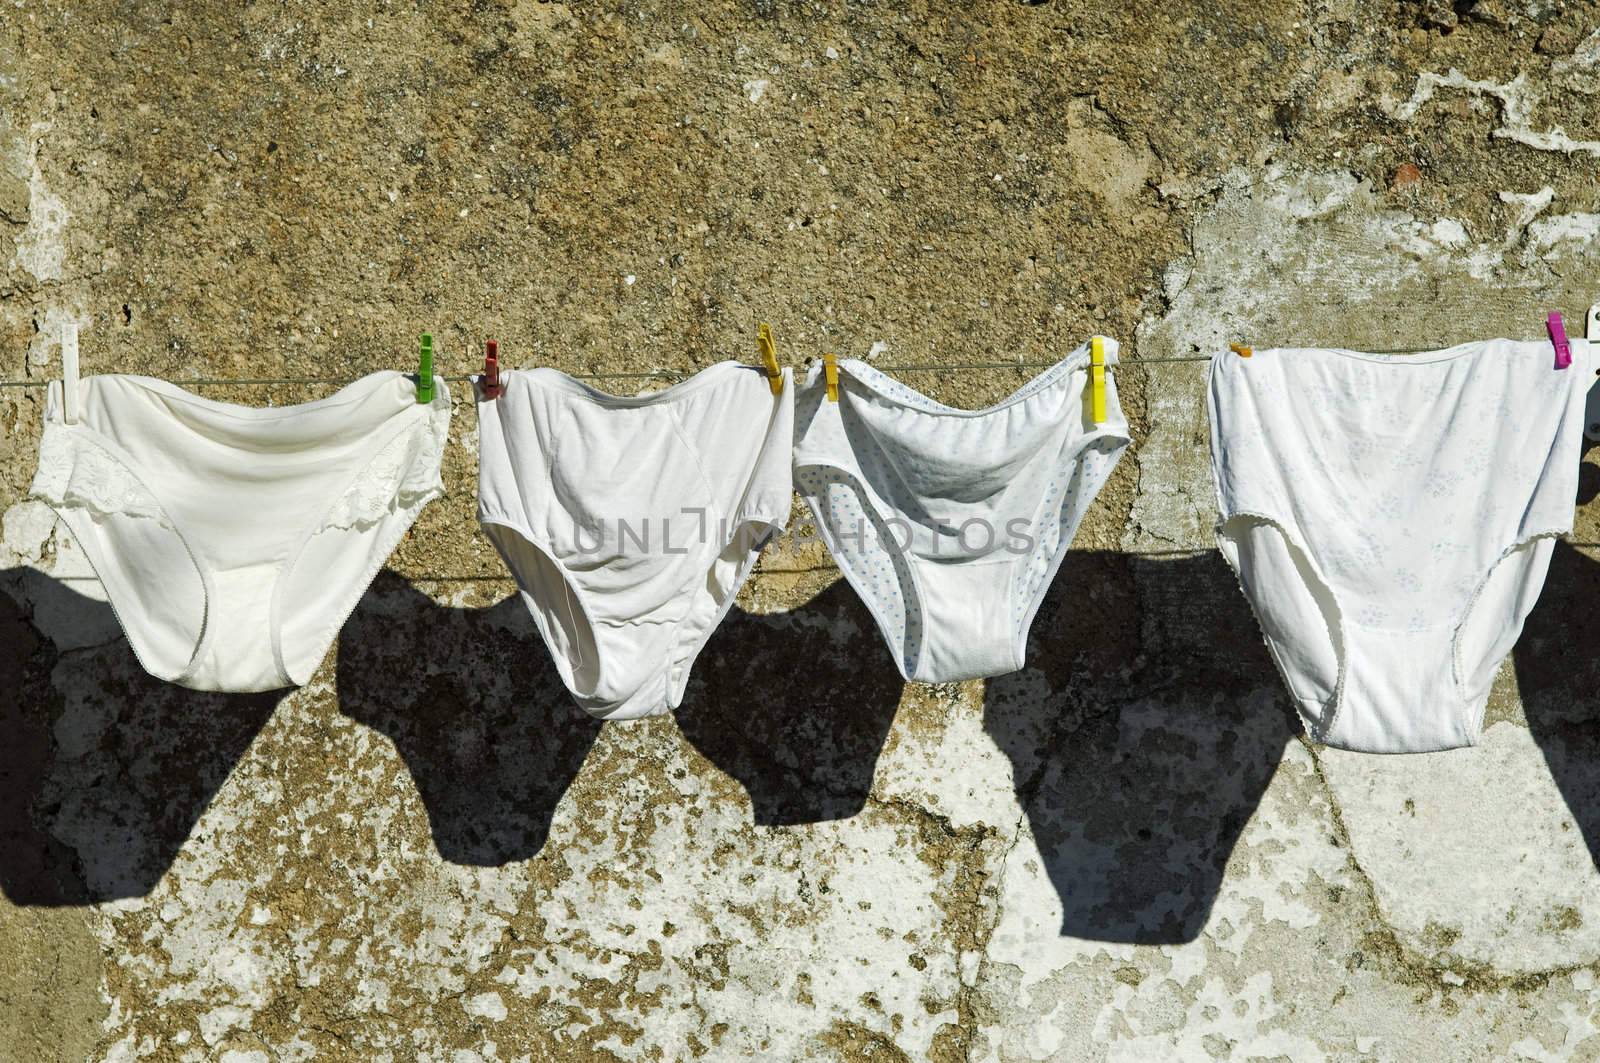 Knickers drying hanged in a cloth line 